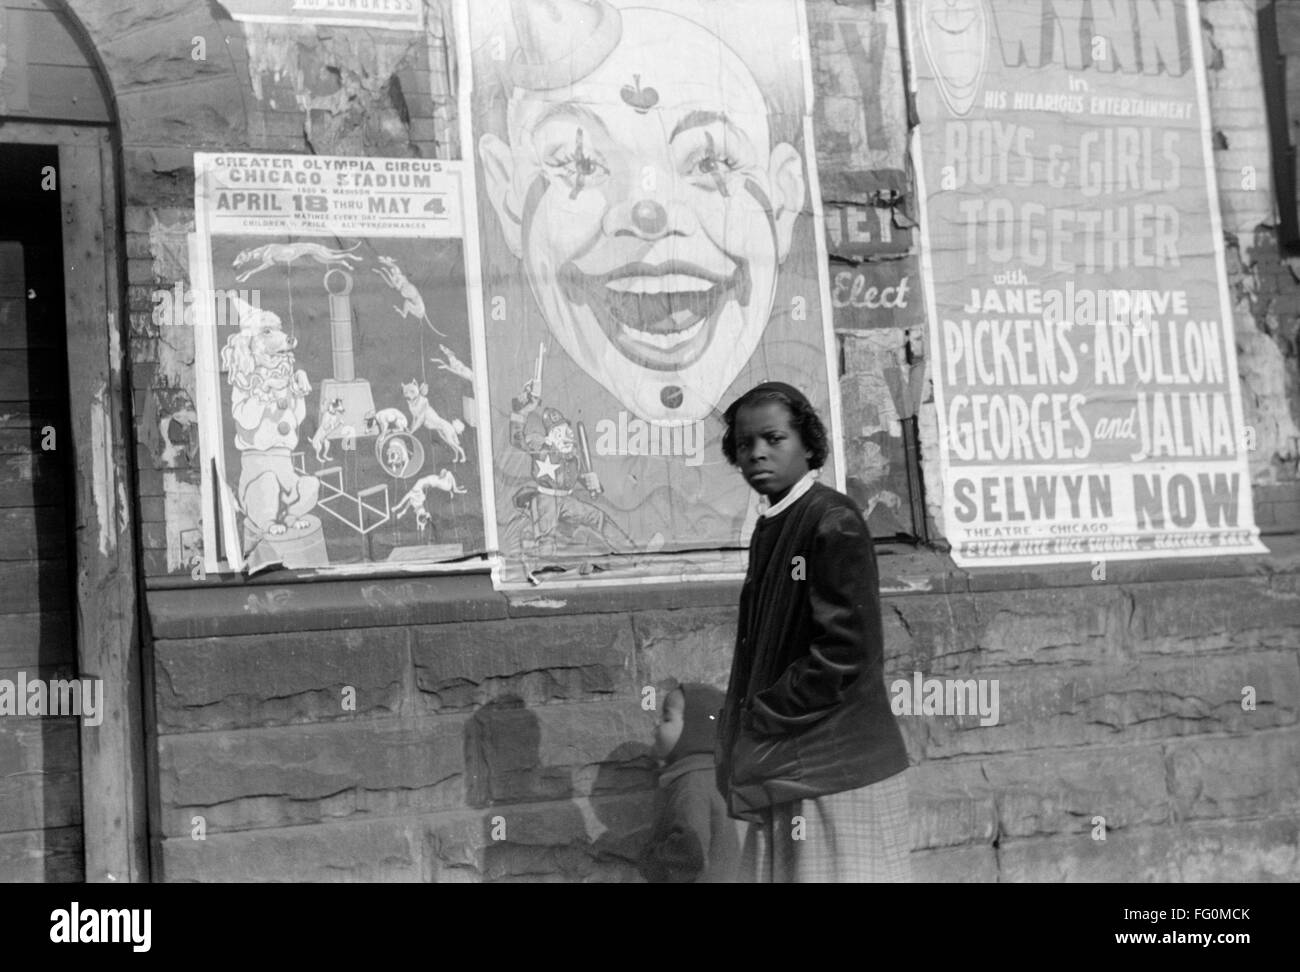 CHICAGO: POSTERS, 1941. /nCircus posters on a wall in the Black Belt area of Chicago, Illinois. Photograph by Edwin Rosskam, 1941. Stock Photo